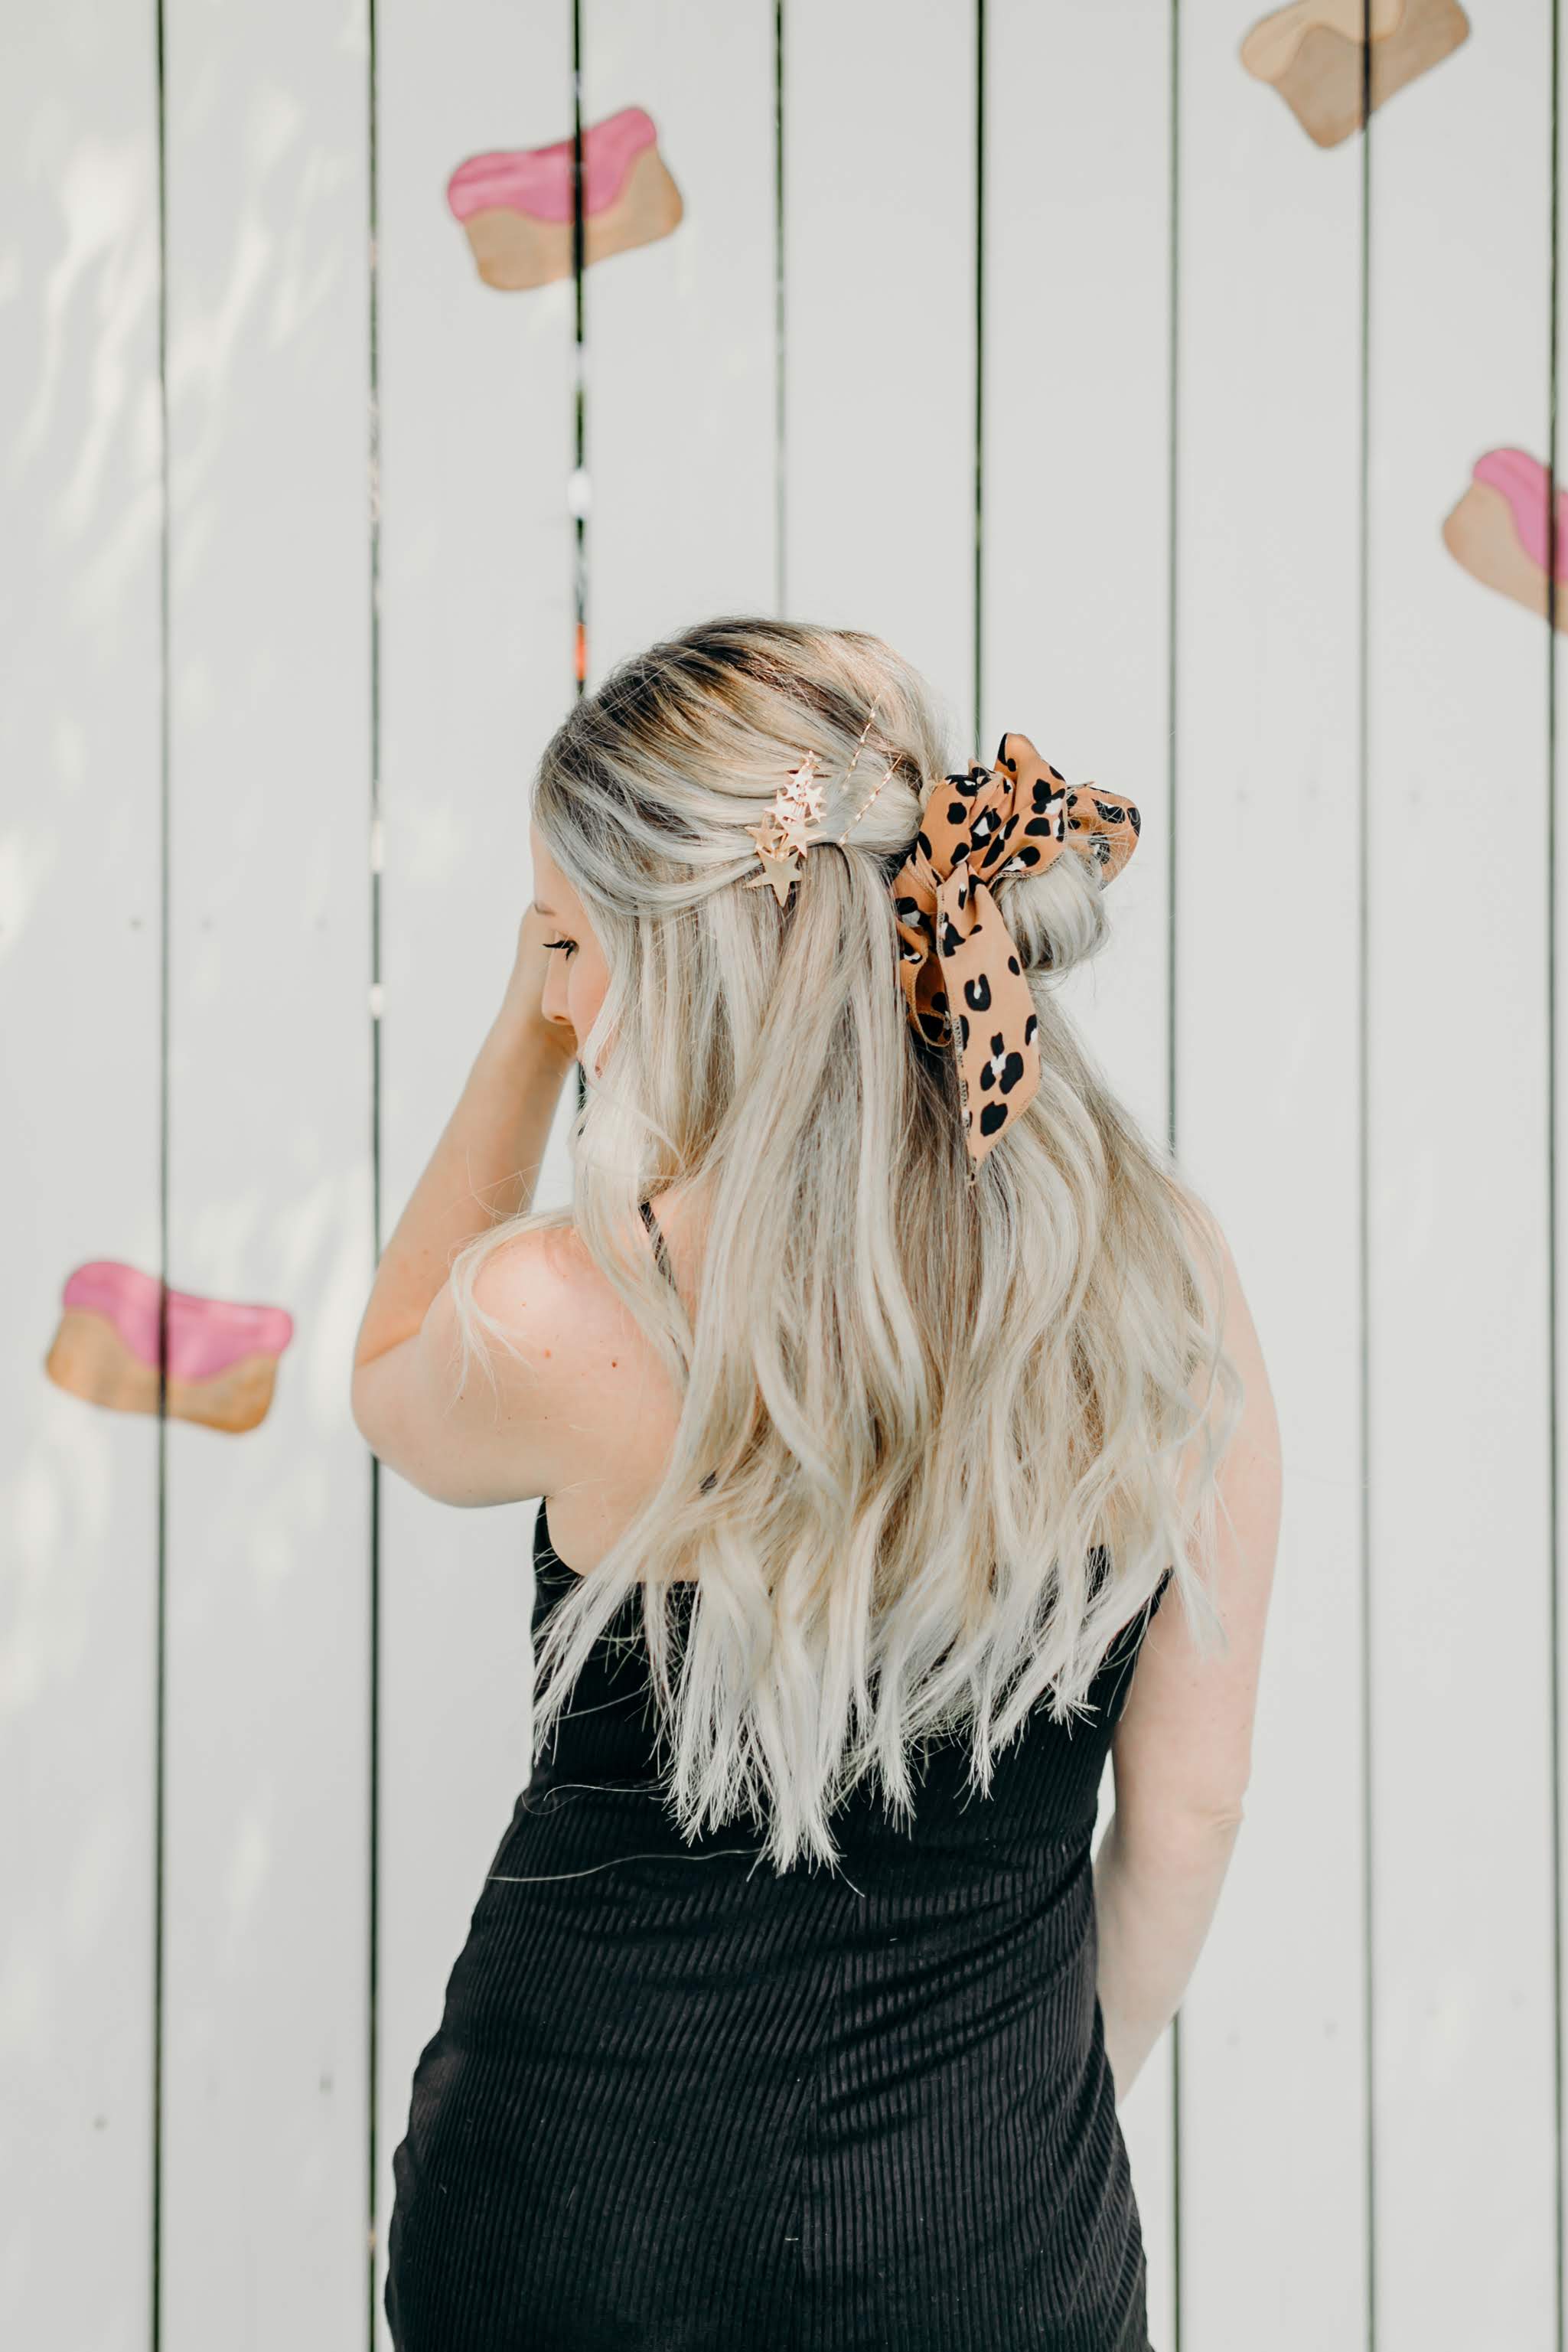 How to wear hair accessories  The best way to dress up any